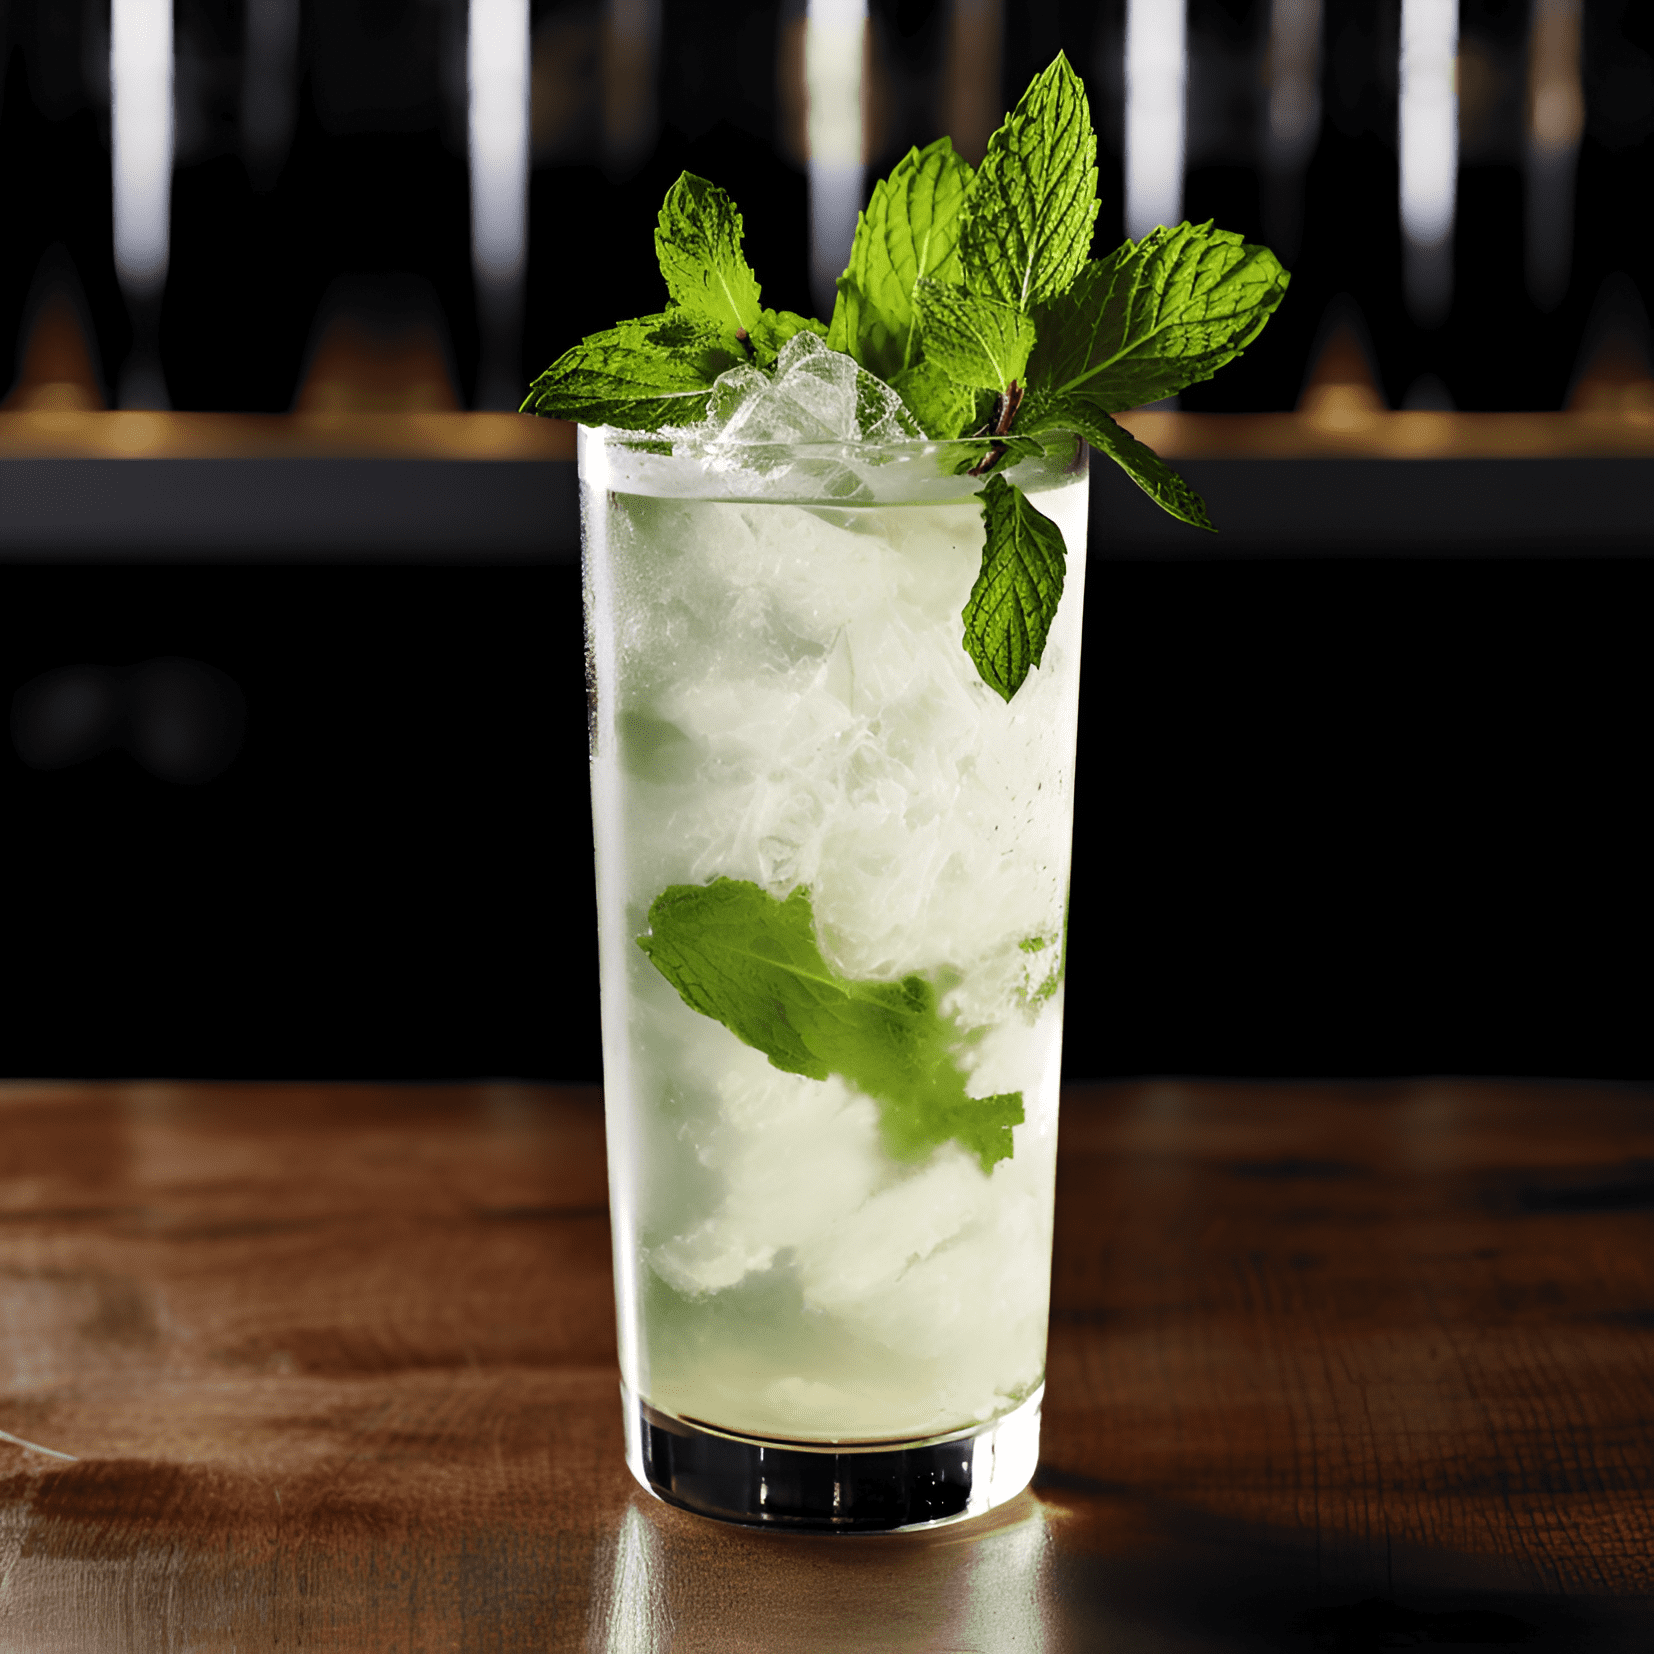 Bootleg Cocktail Recipe - The Bootleg cocktail is a well-balanced and refreshing drink with a slightly sweet and tangy flavor. It has a light, crisp taste with a hint of mint and citrus, making it perfect for a warm summer day or a relaxing evening.